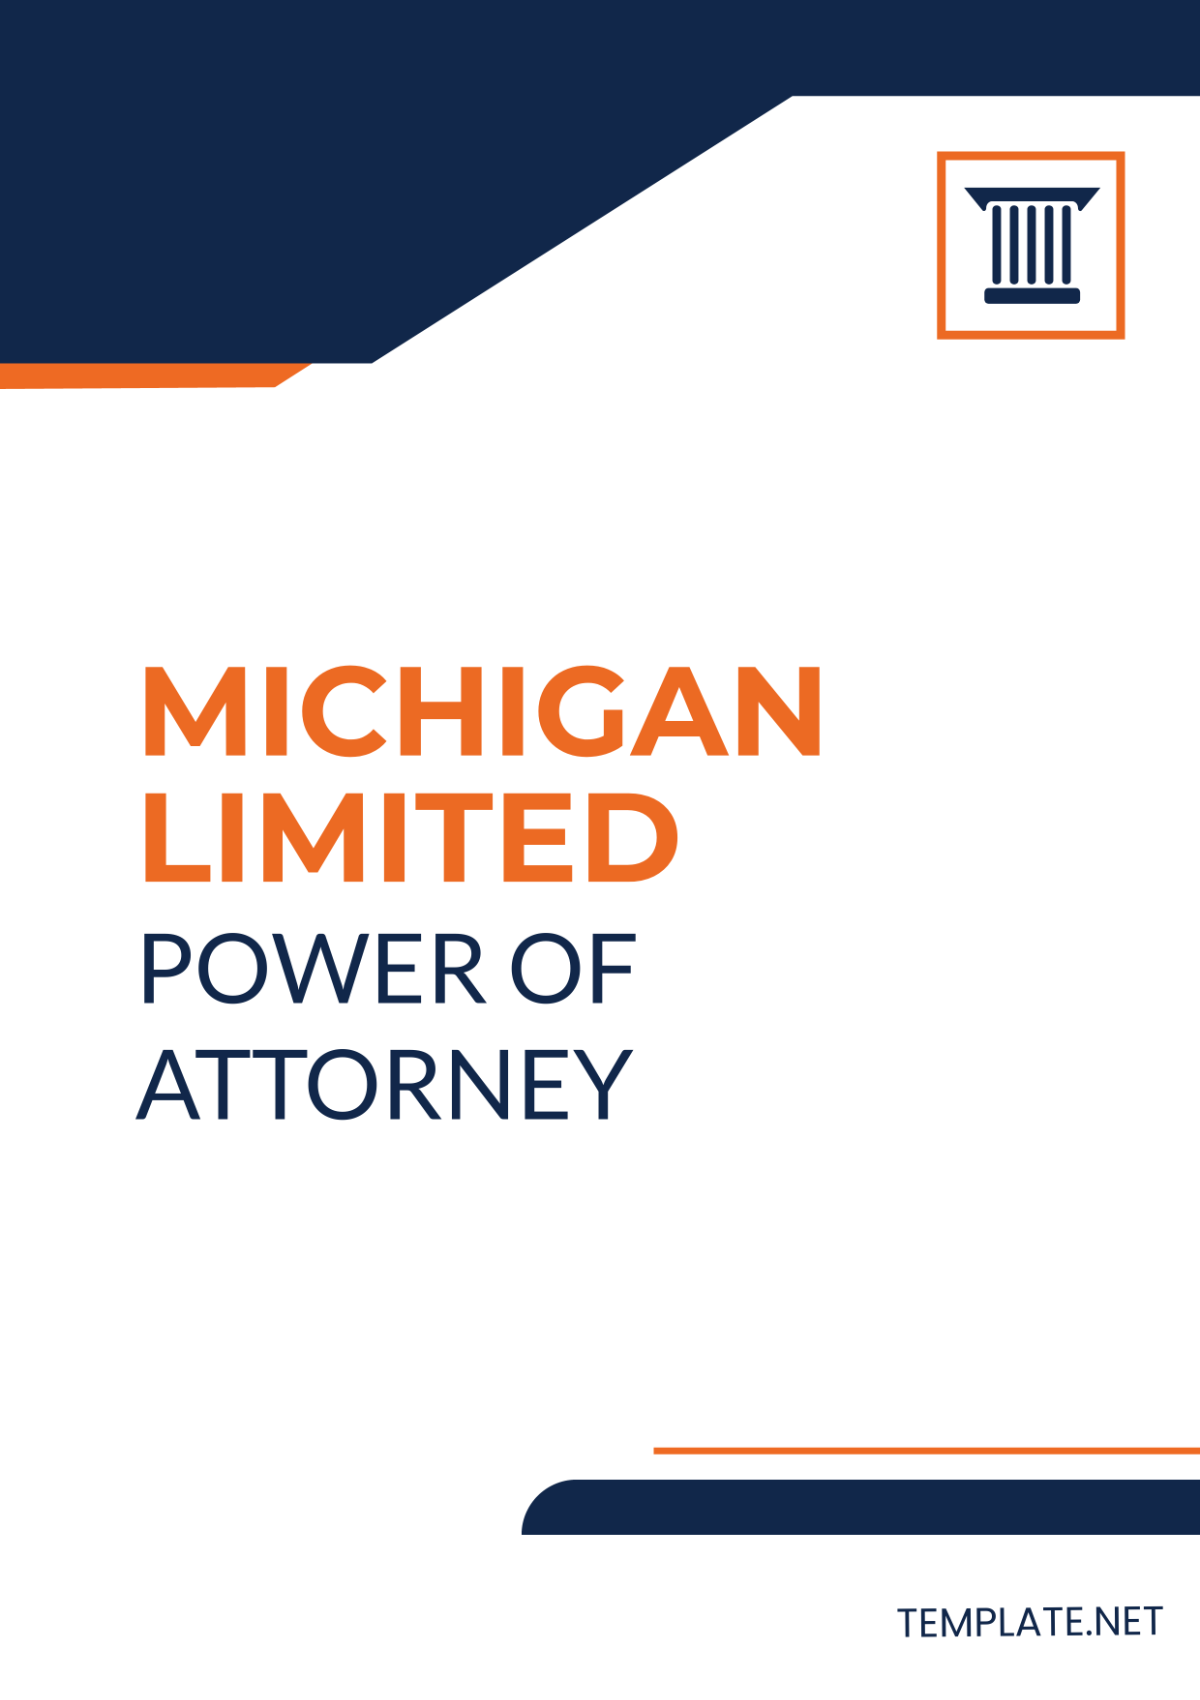 Free Michigan Limited Power of Attorney Template